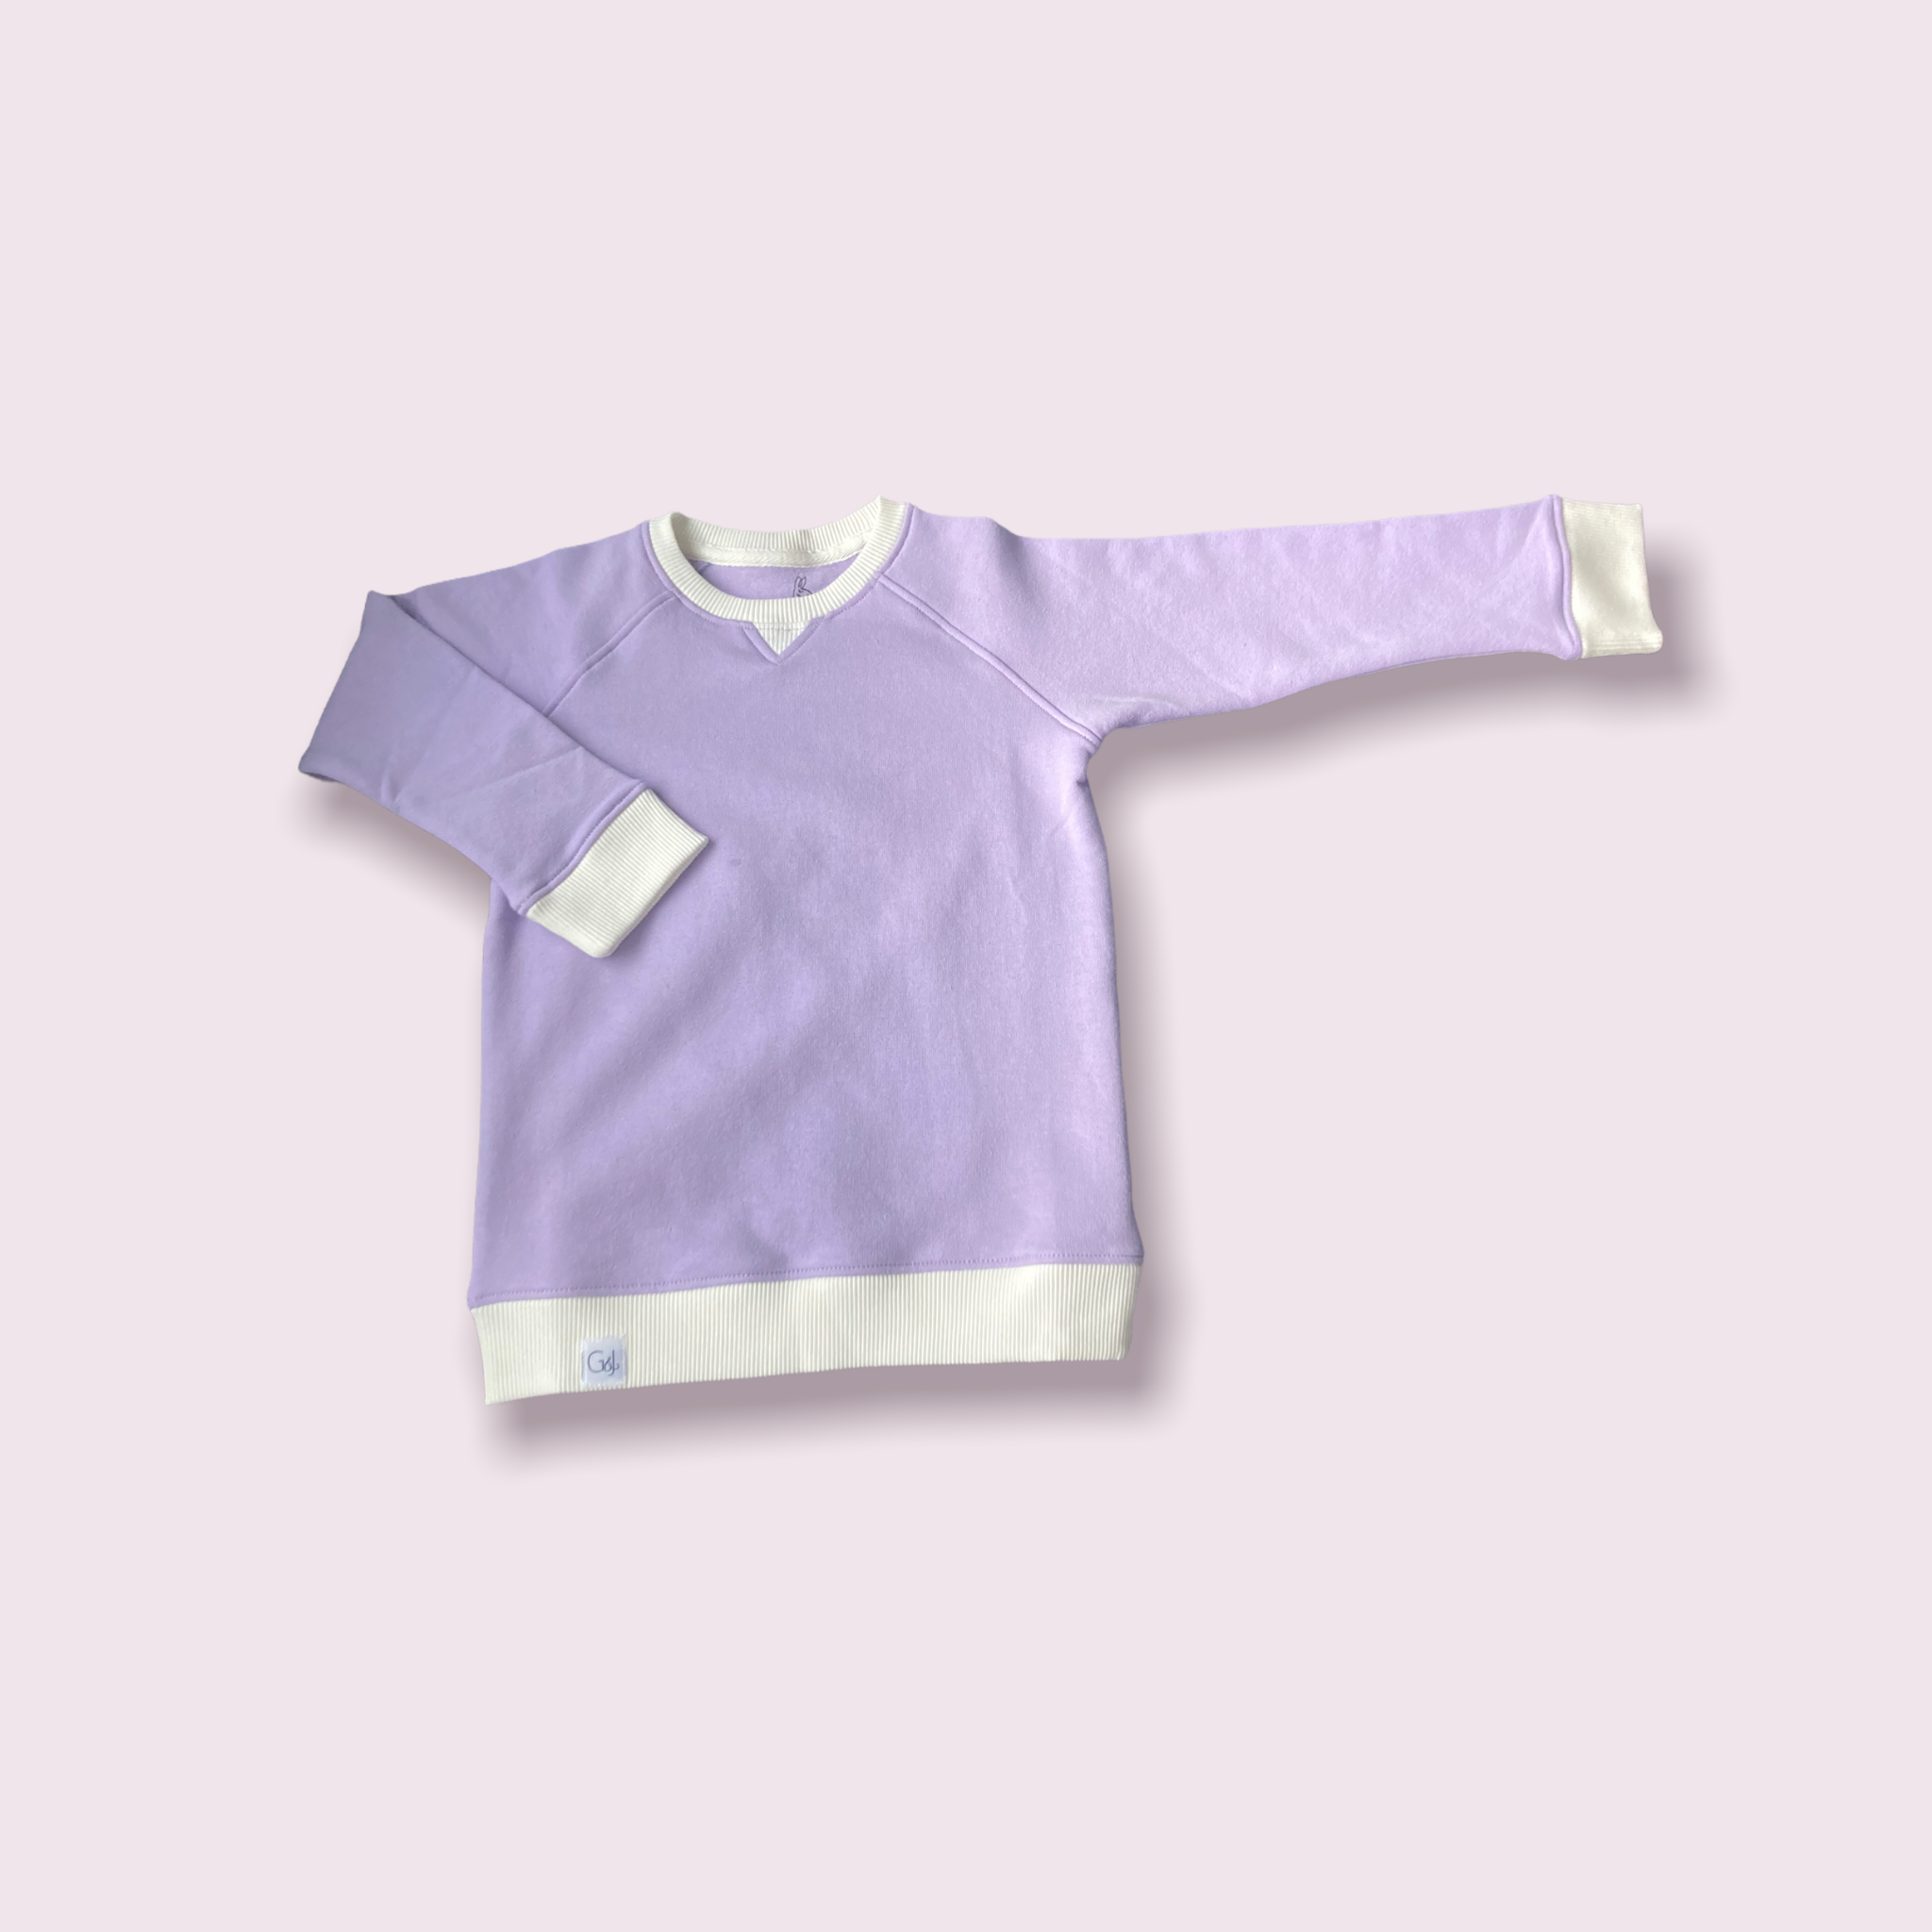 The French Terry Crewneck in lilac.